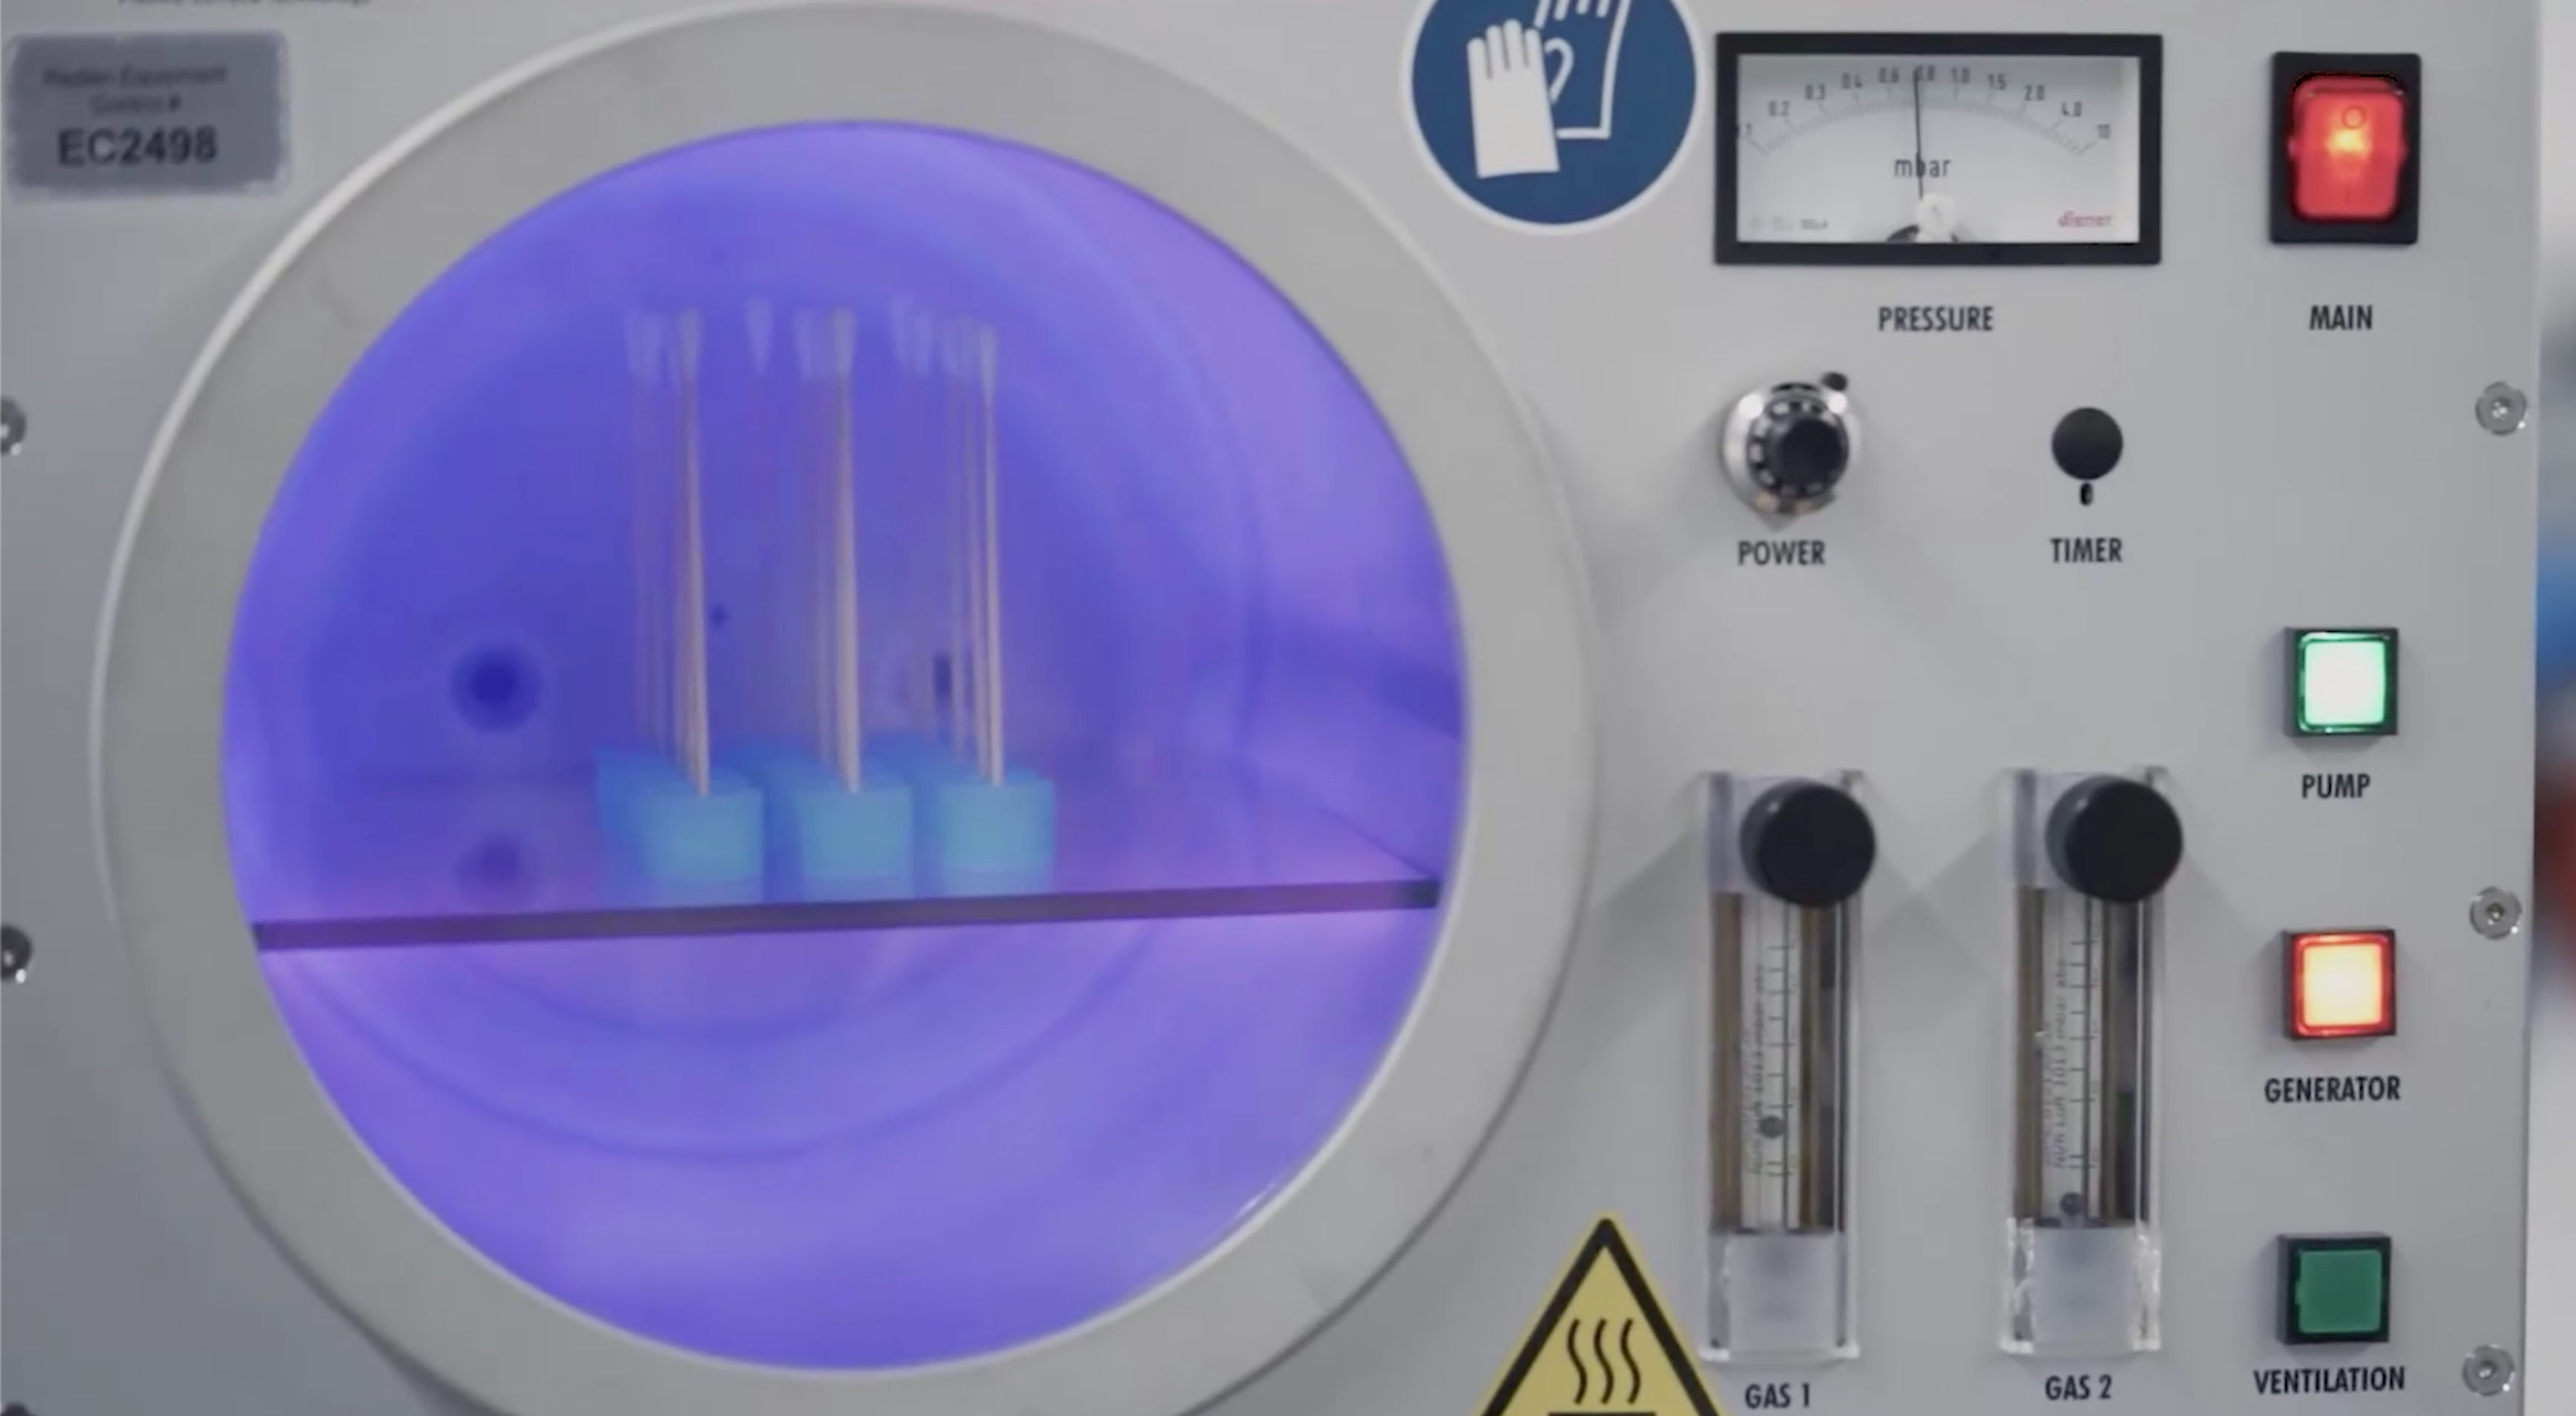 Differences between the Types of Plasma Treatments, Specifically Plasma Coating